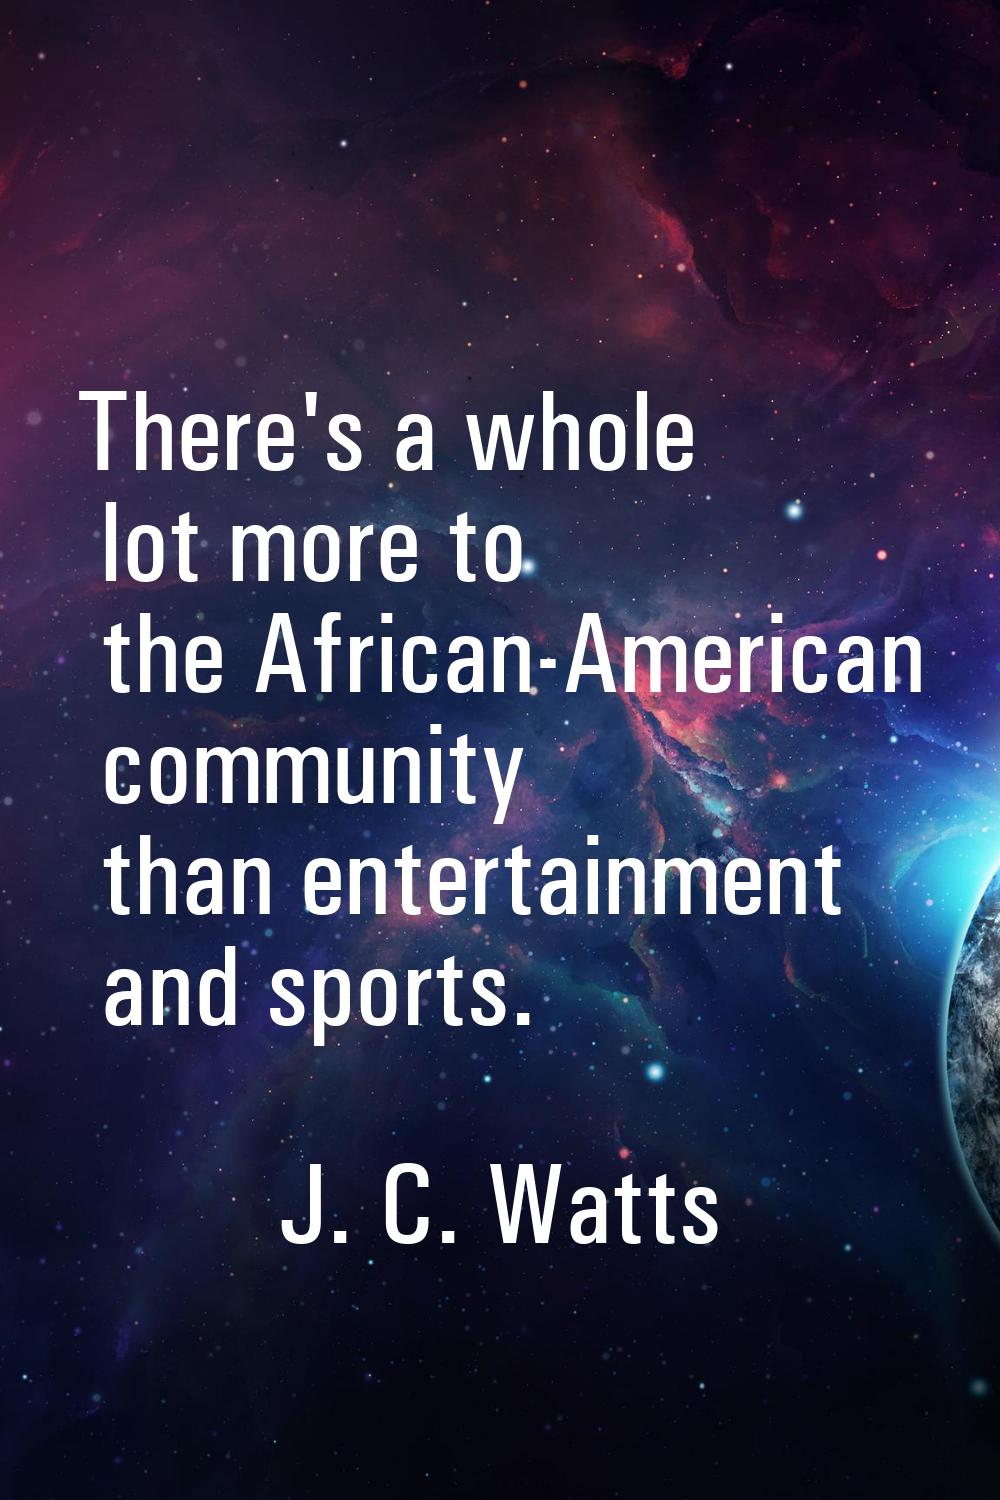 There's a whole lot more to the African-American community than entertainment and sports.